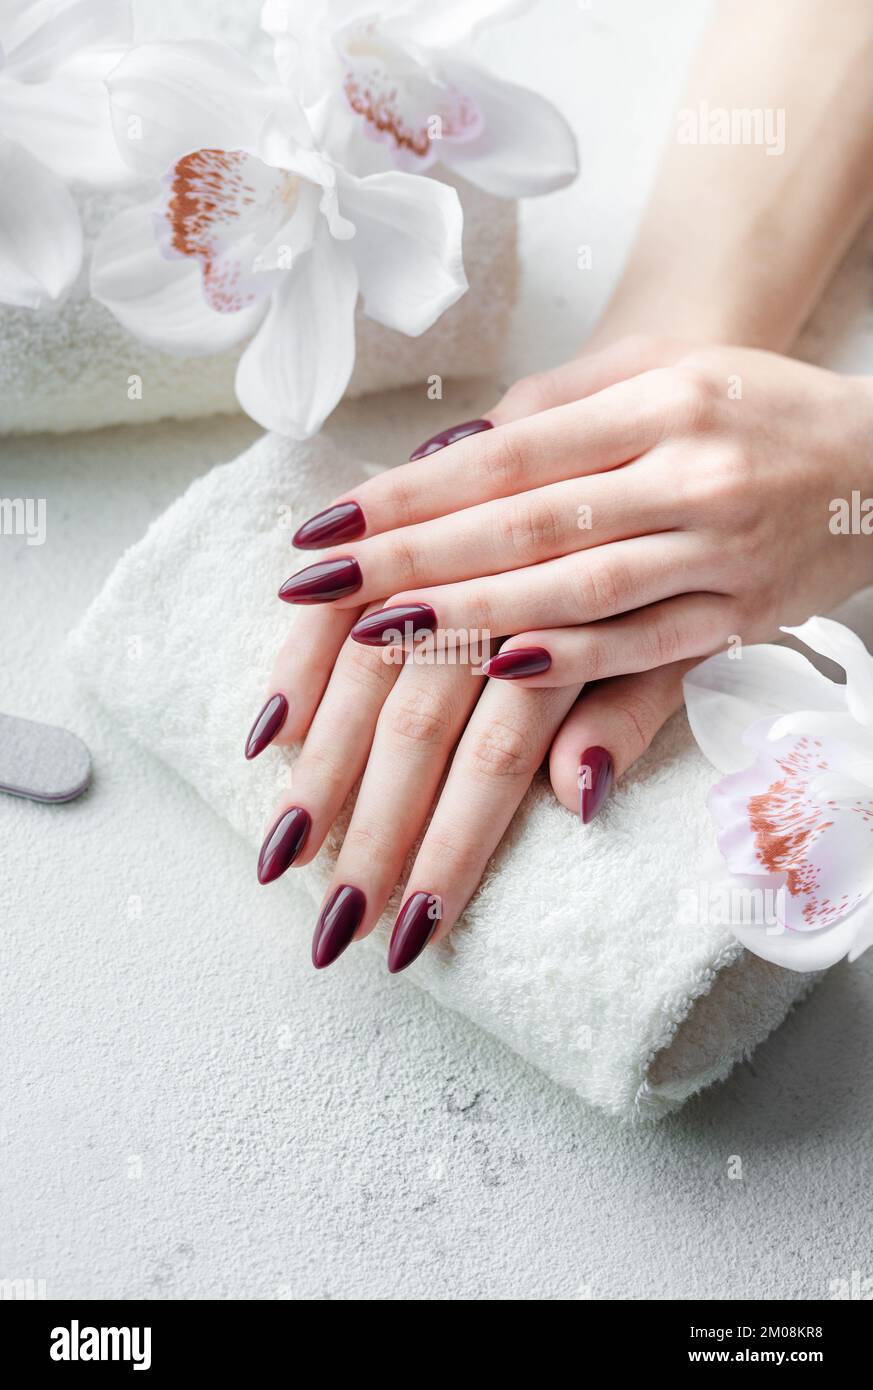 Beautiful hands of a young woman with dark red manicure on nails. Manicure process. Stock Photo